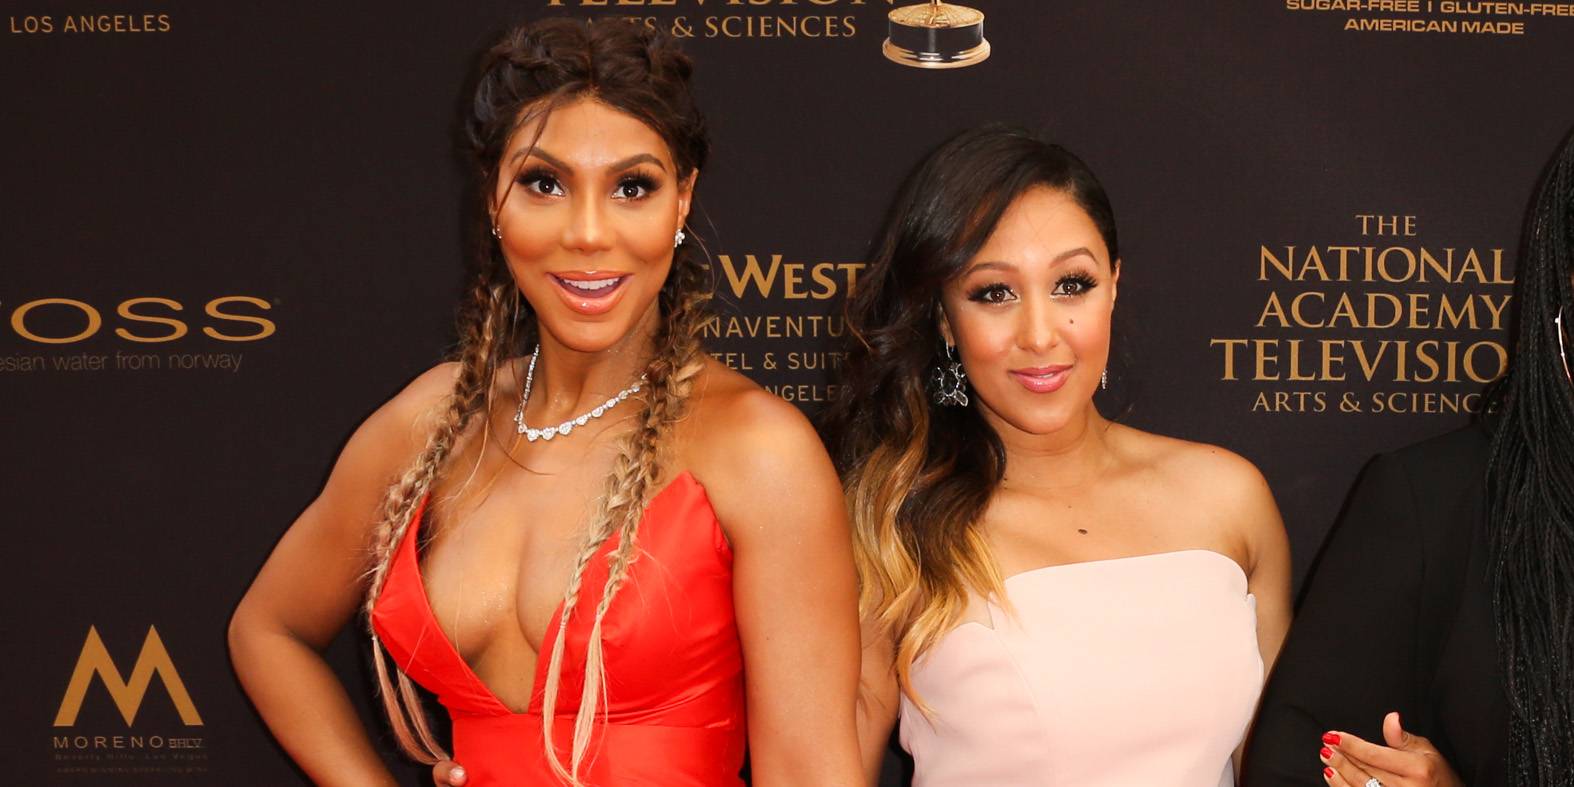 LOS ANGELES, CA - MAY 01:  (L-R) TV Personalities Tamar Braxton, Tamera Mowry-Housley, Loni Love, Jeannie Mai, and Adrienne Bailon attend the 2016 Daytime Emmy Awards at The Westin Bonaventure Hotel on May 1, 2016 in Los Angeles, California.  (Photo by Paul Archuleta/FilmMagic)